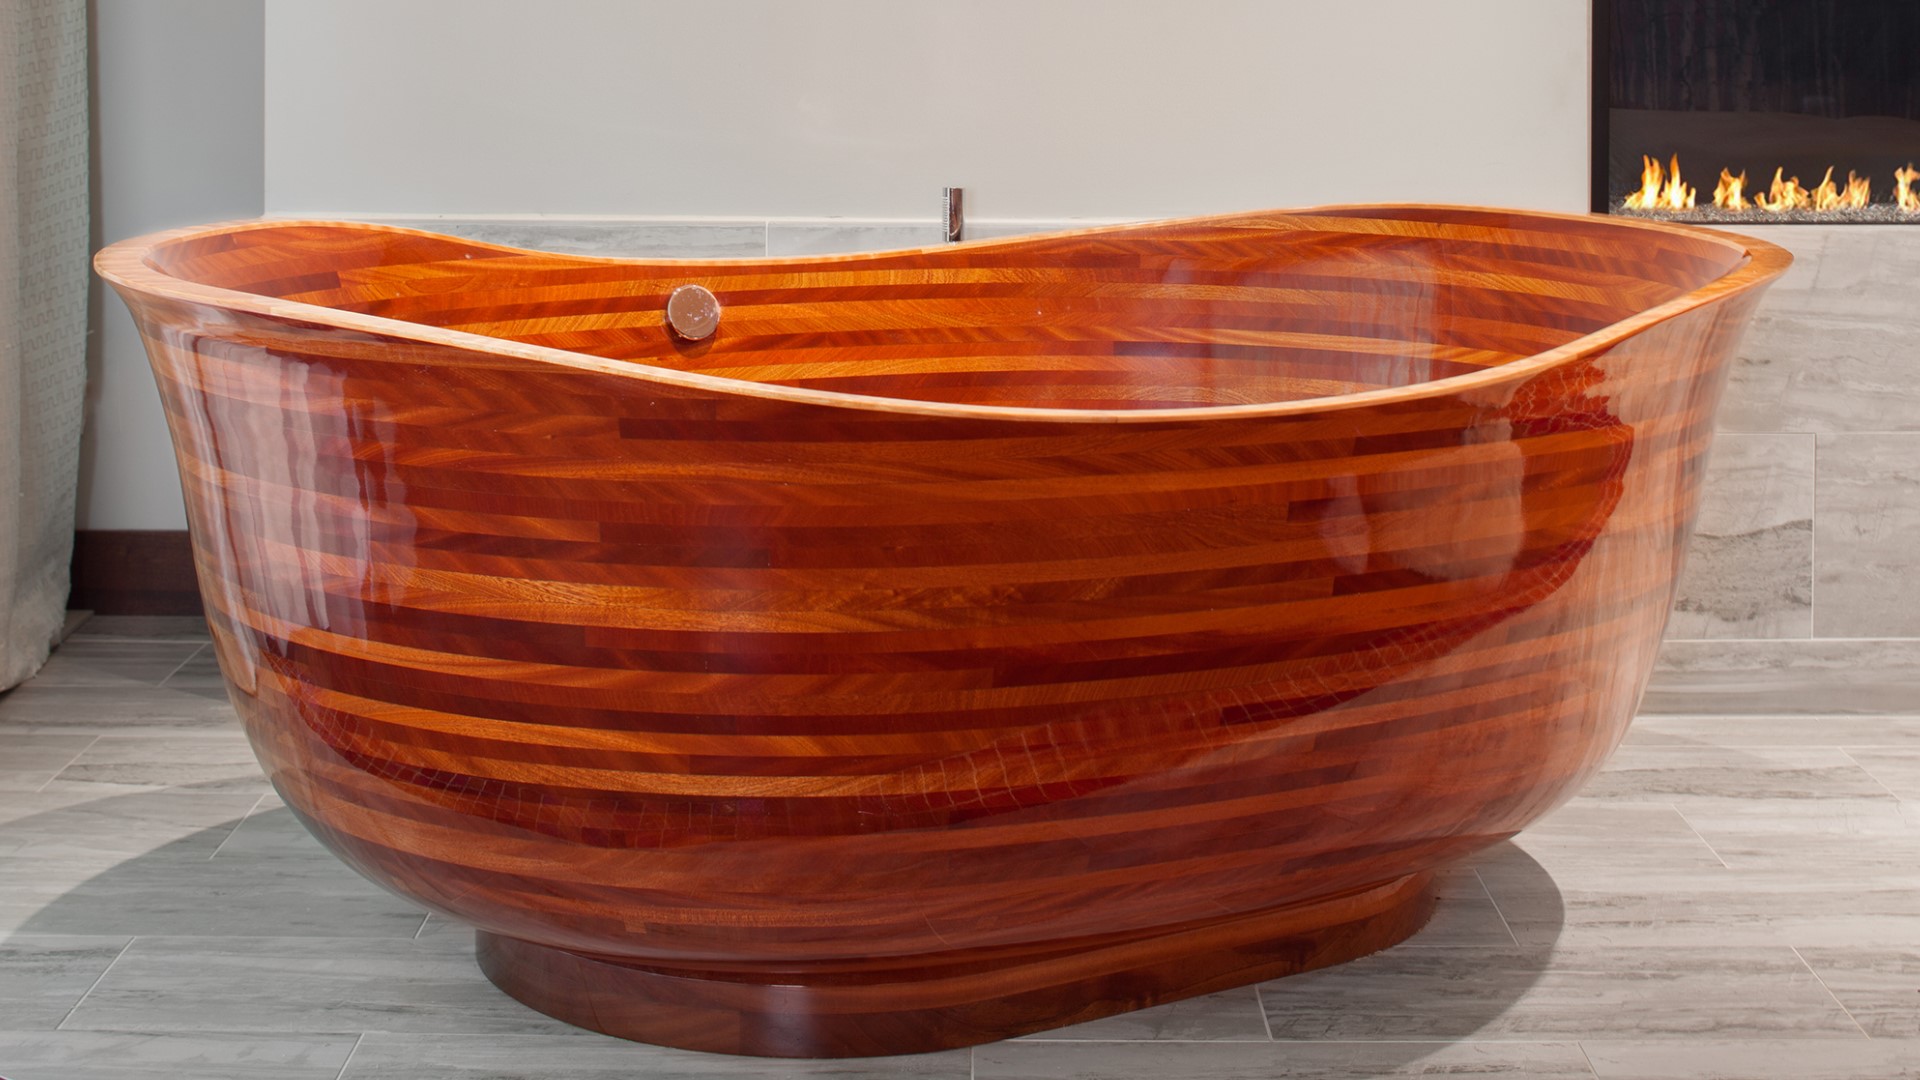 NK Woodworking and Design is an award-winning company specializing in custom functional art